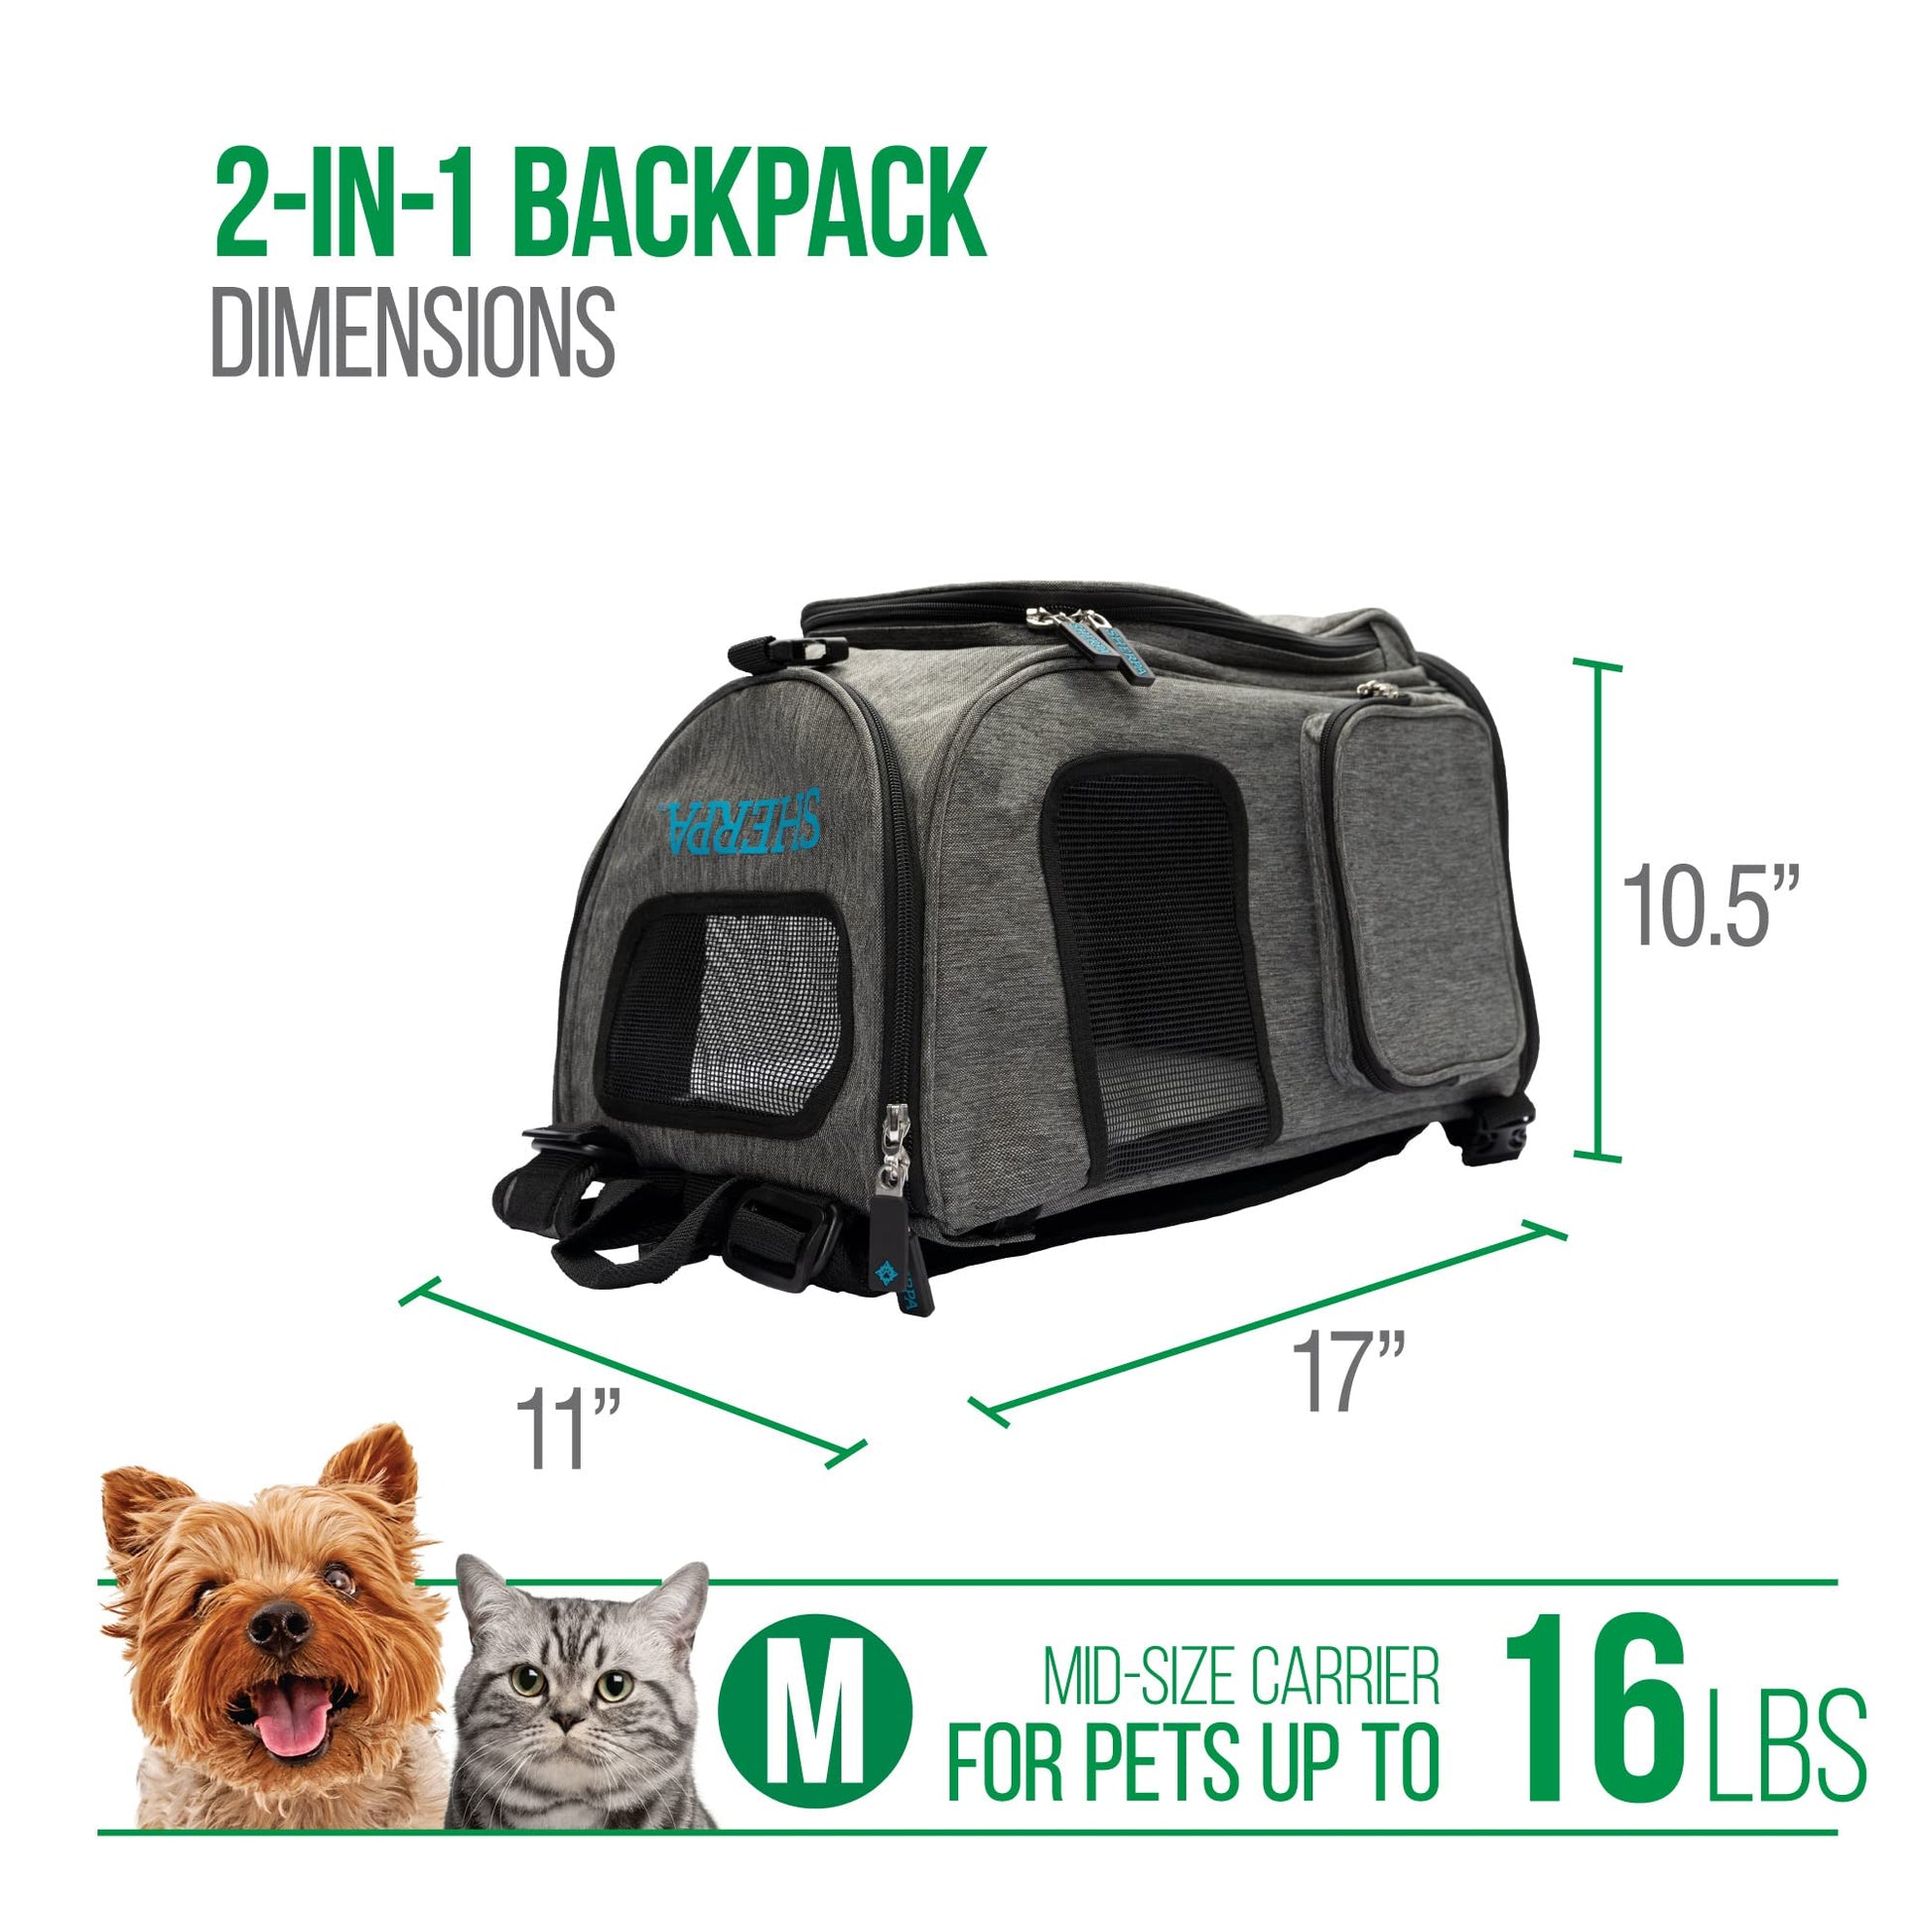 Sherpa Travel Backpacks & Pet Carriers for Cats & Small Dogs - Bubble Backpack, Hands-Free Sling, Tote Bag, & More - Multiple Styles & Sizes